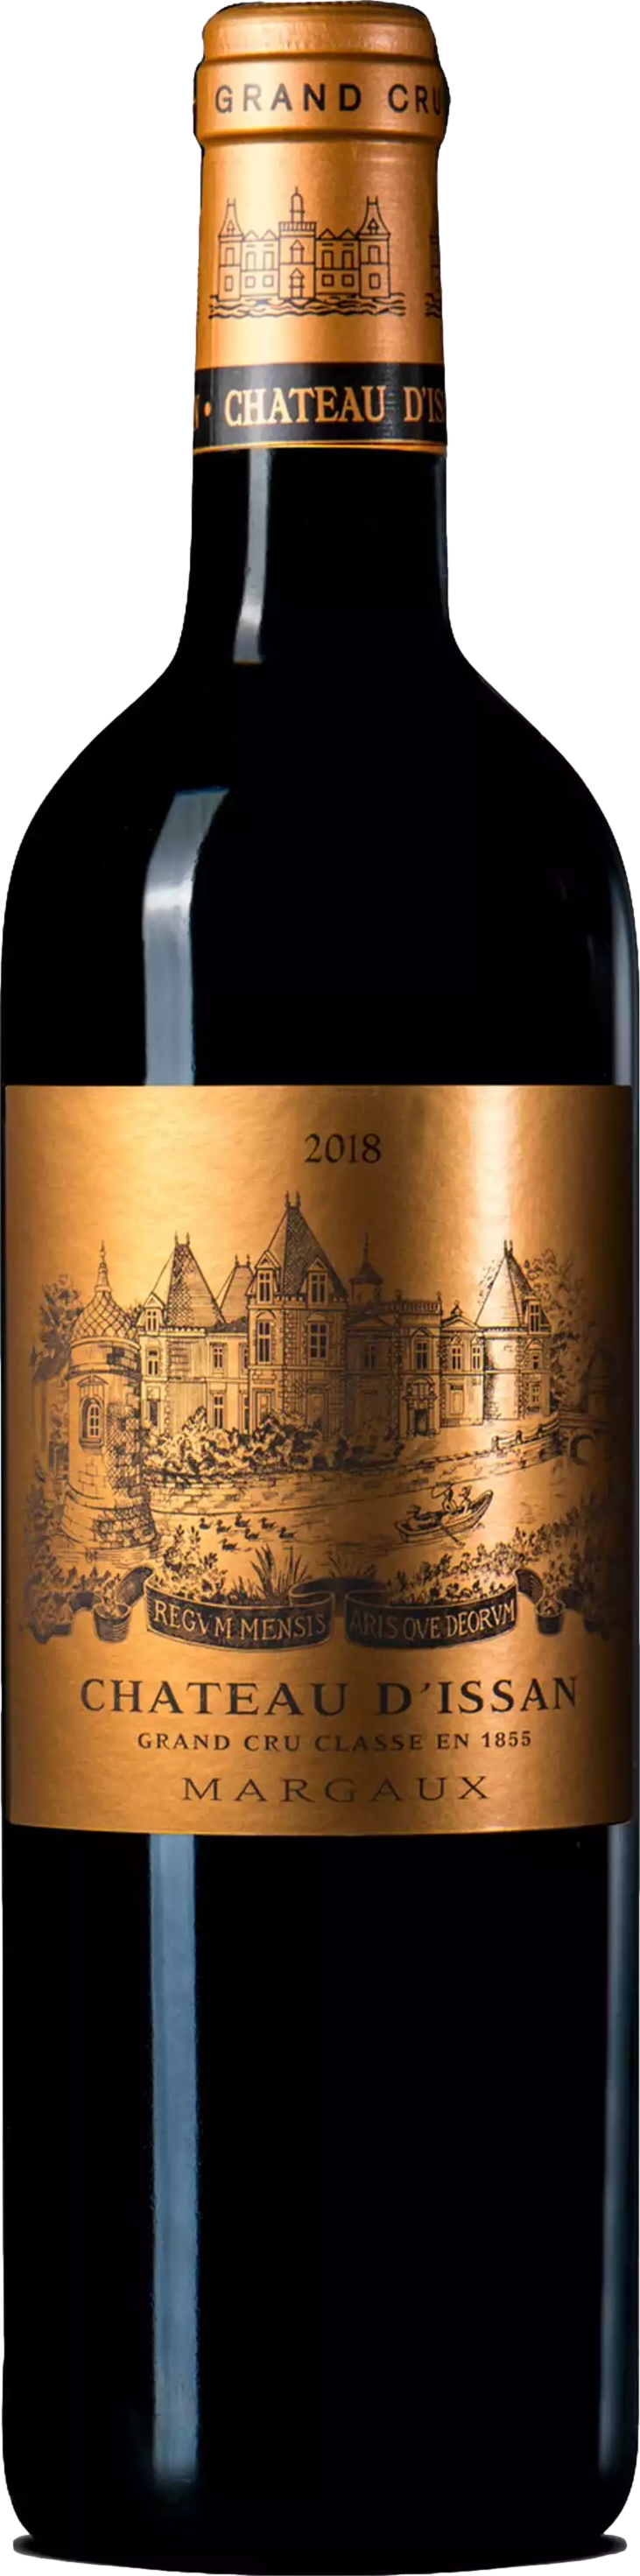 Chateau d%27Issan 2018 Chateau d%27Issan 8wines DACH